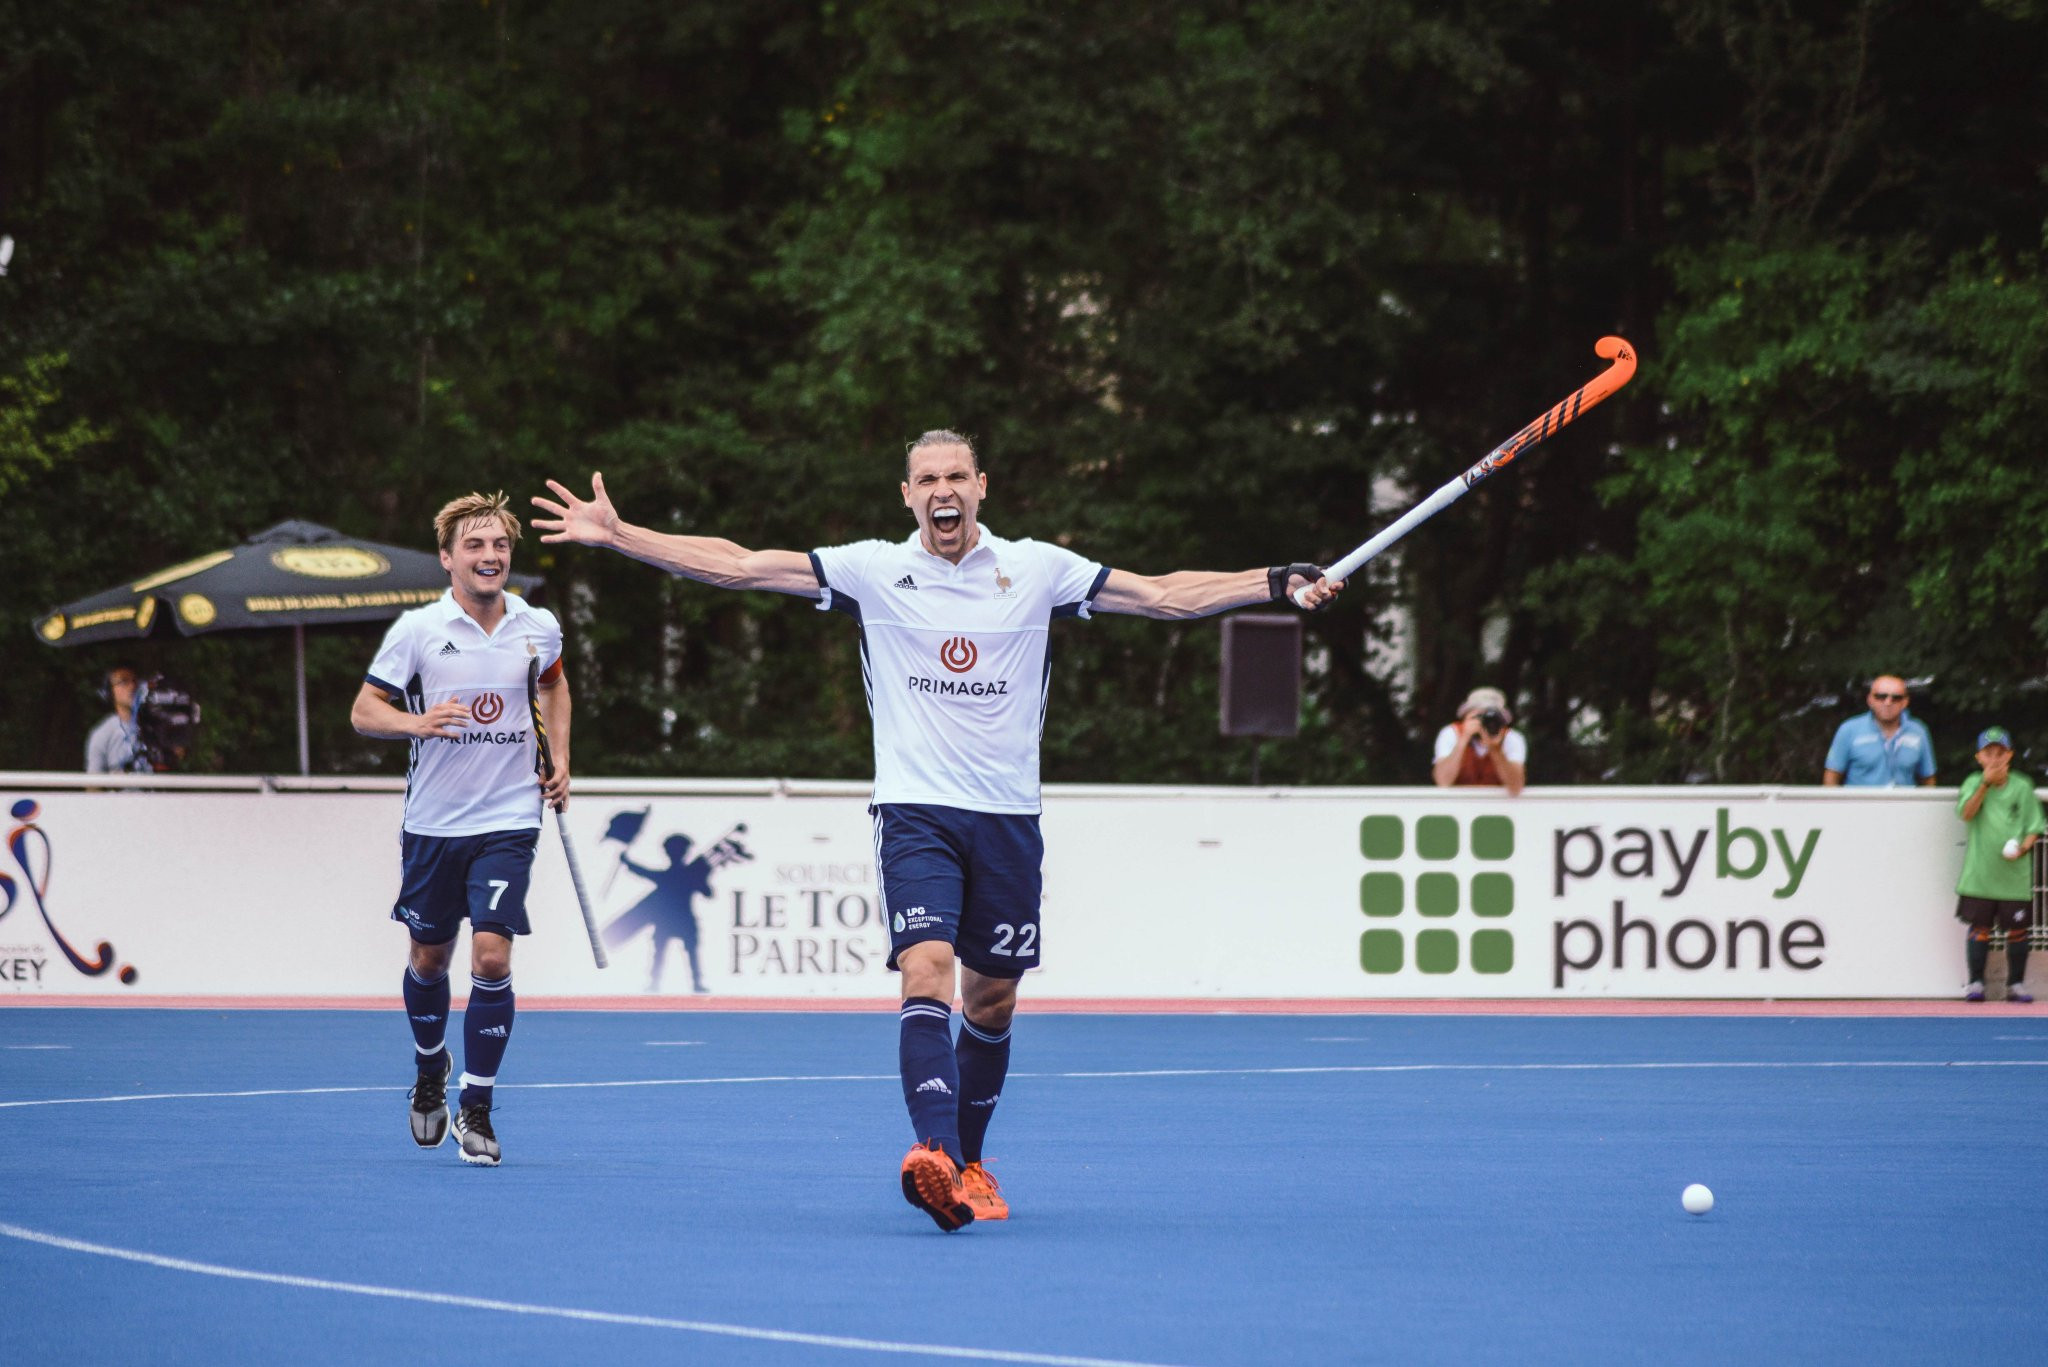 France victorious on home soil at FIH Series Finals in Le Touquet